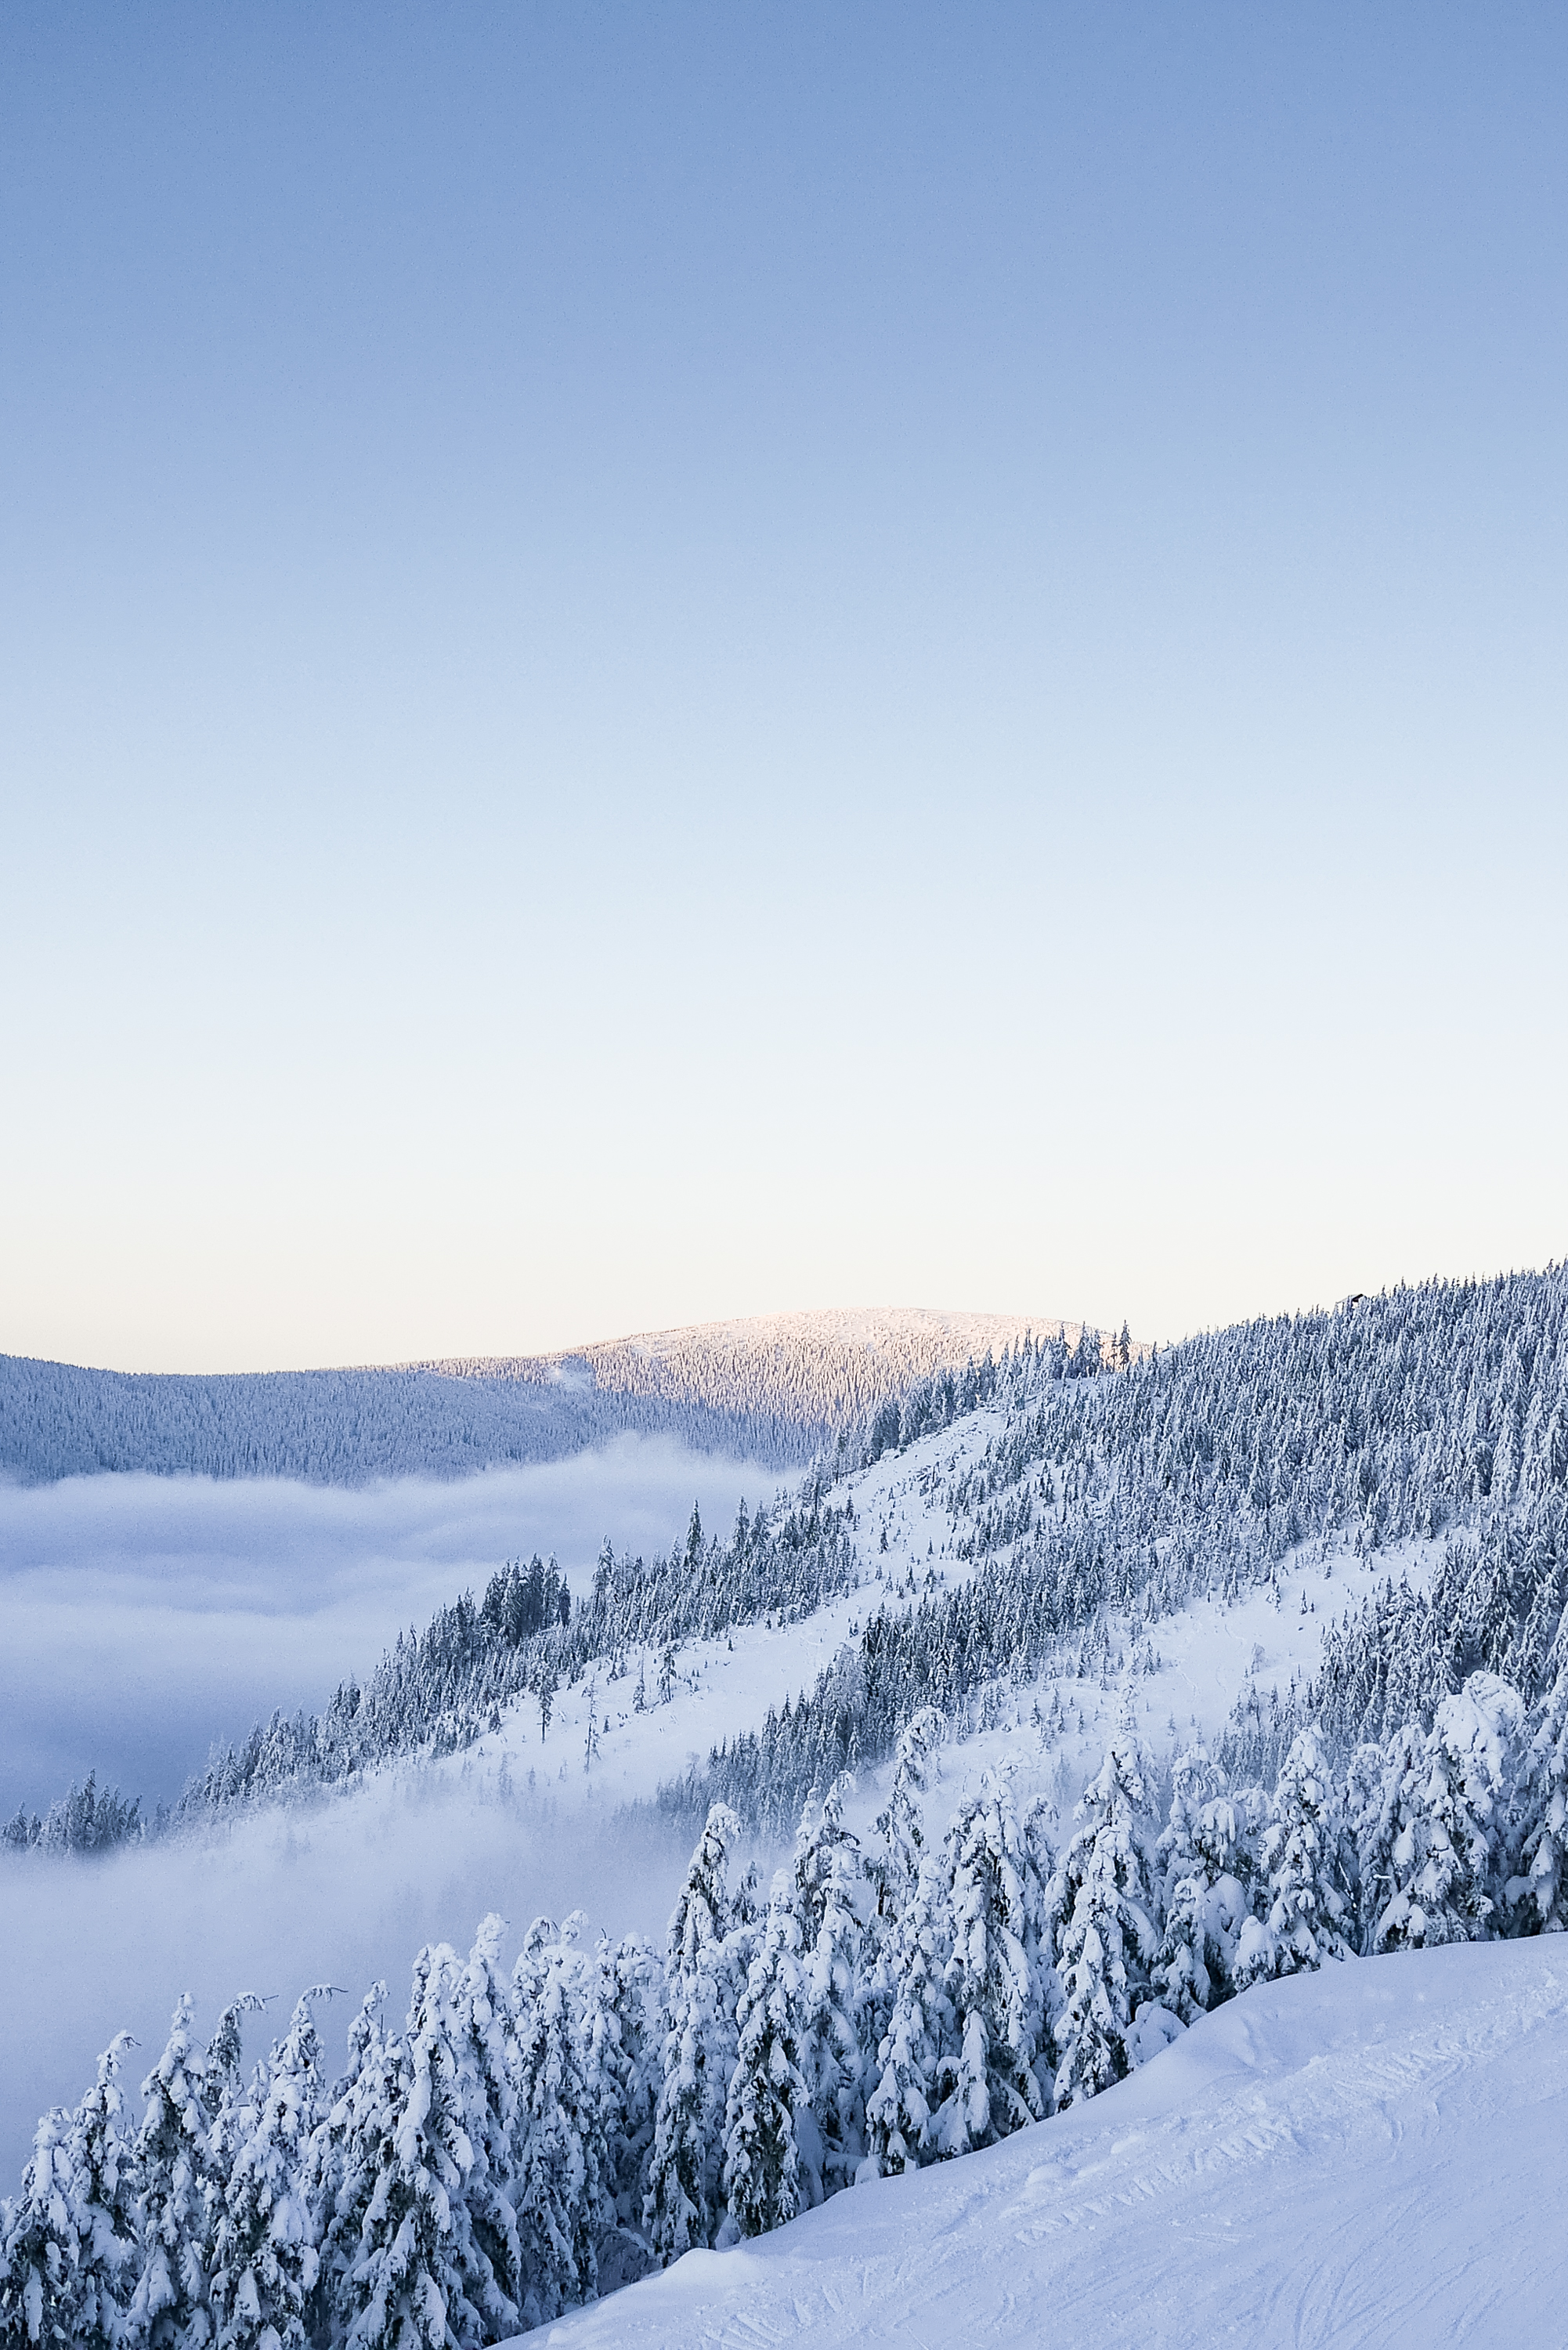 Snowy hills with cloudless sky free stock photo